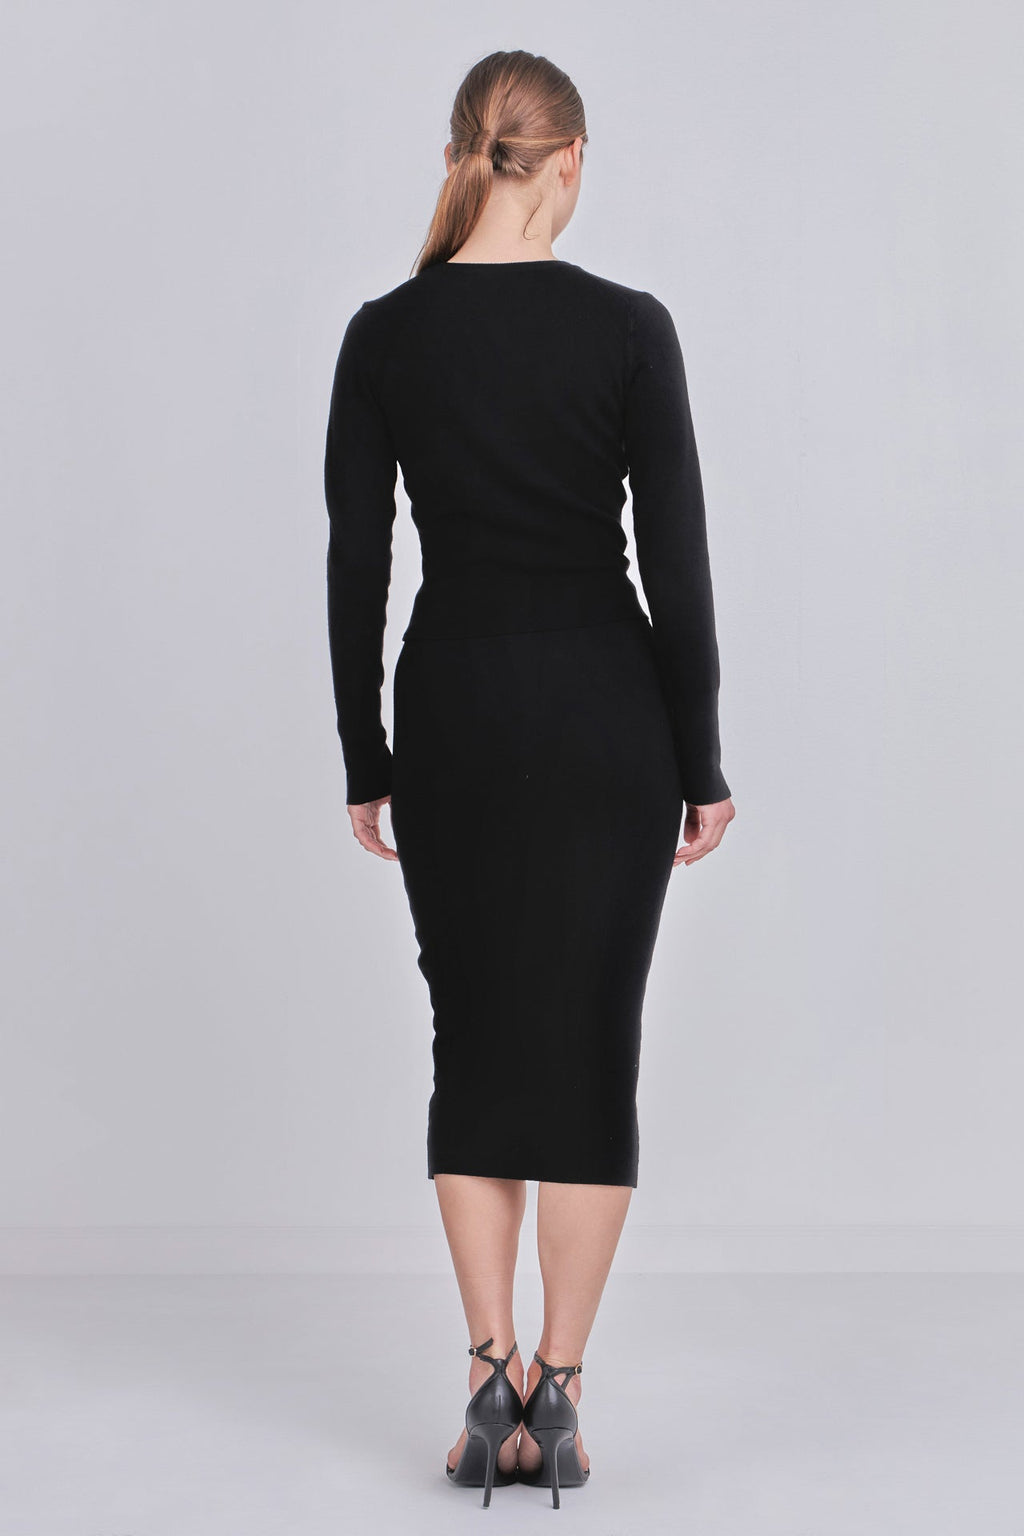 ENDLESS ROSE-Knit Midi Skirt-SKIRTS available at Objectrare